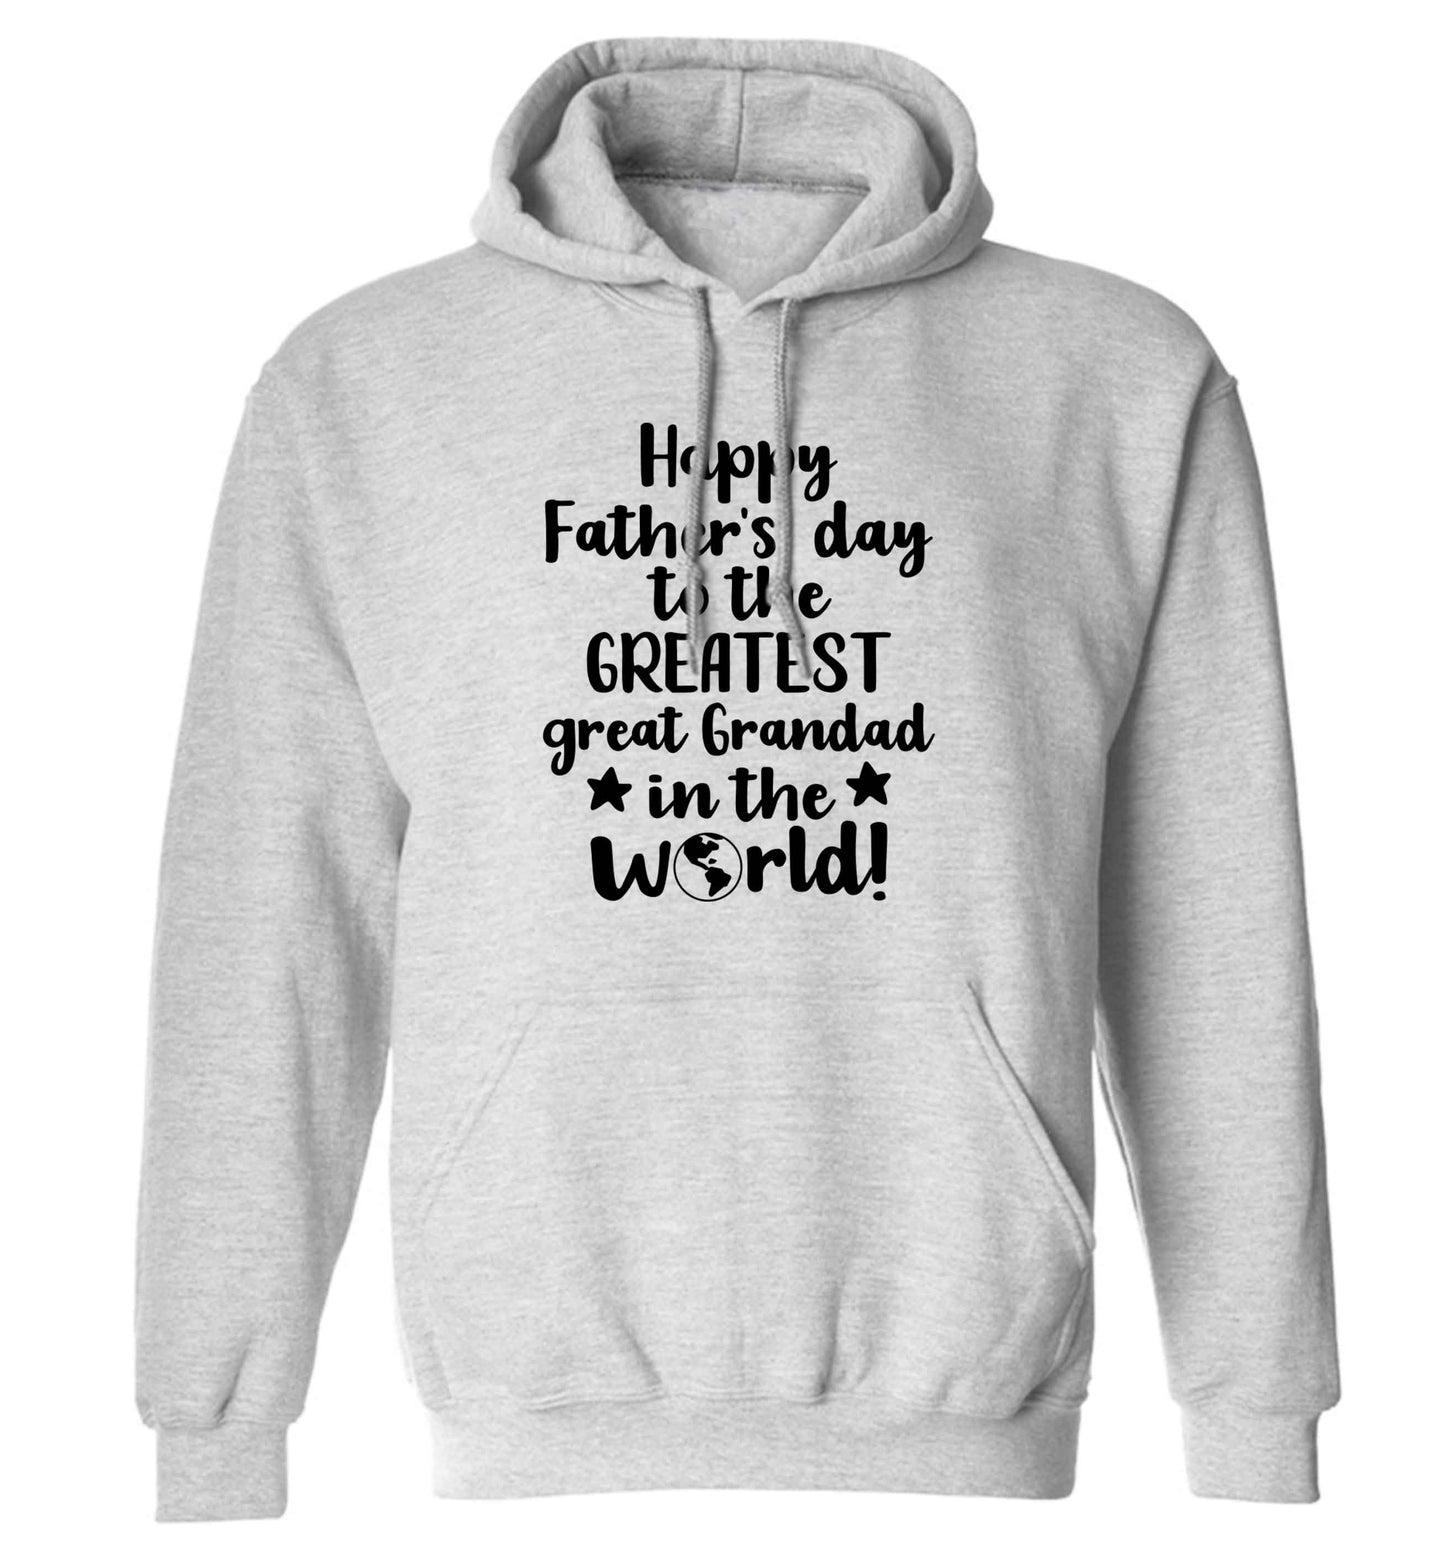 Happy Father's day to the greatest great grandad in the world adults unisex grey hoodie 2XL